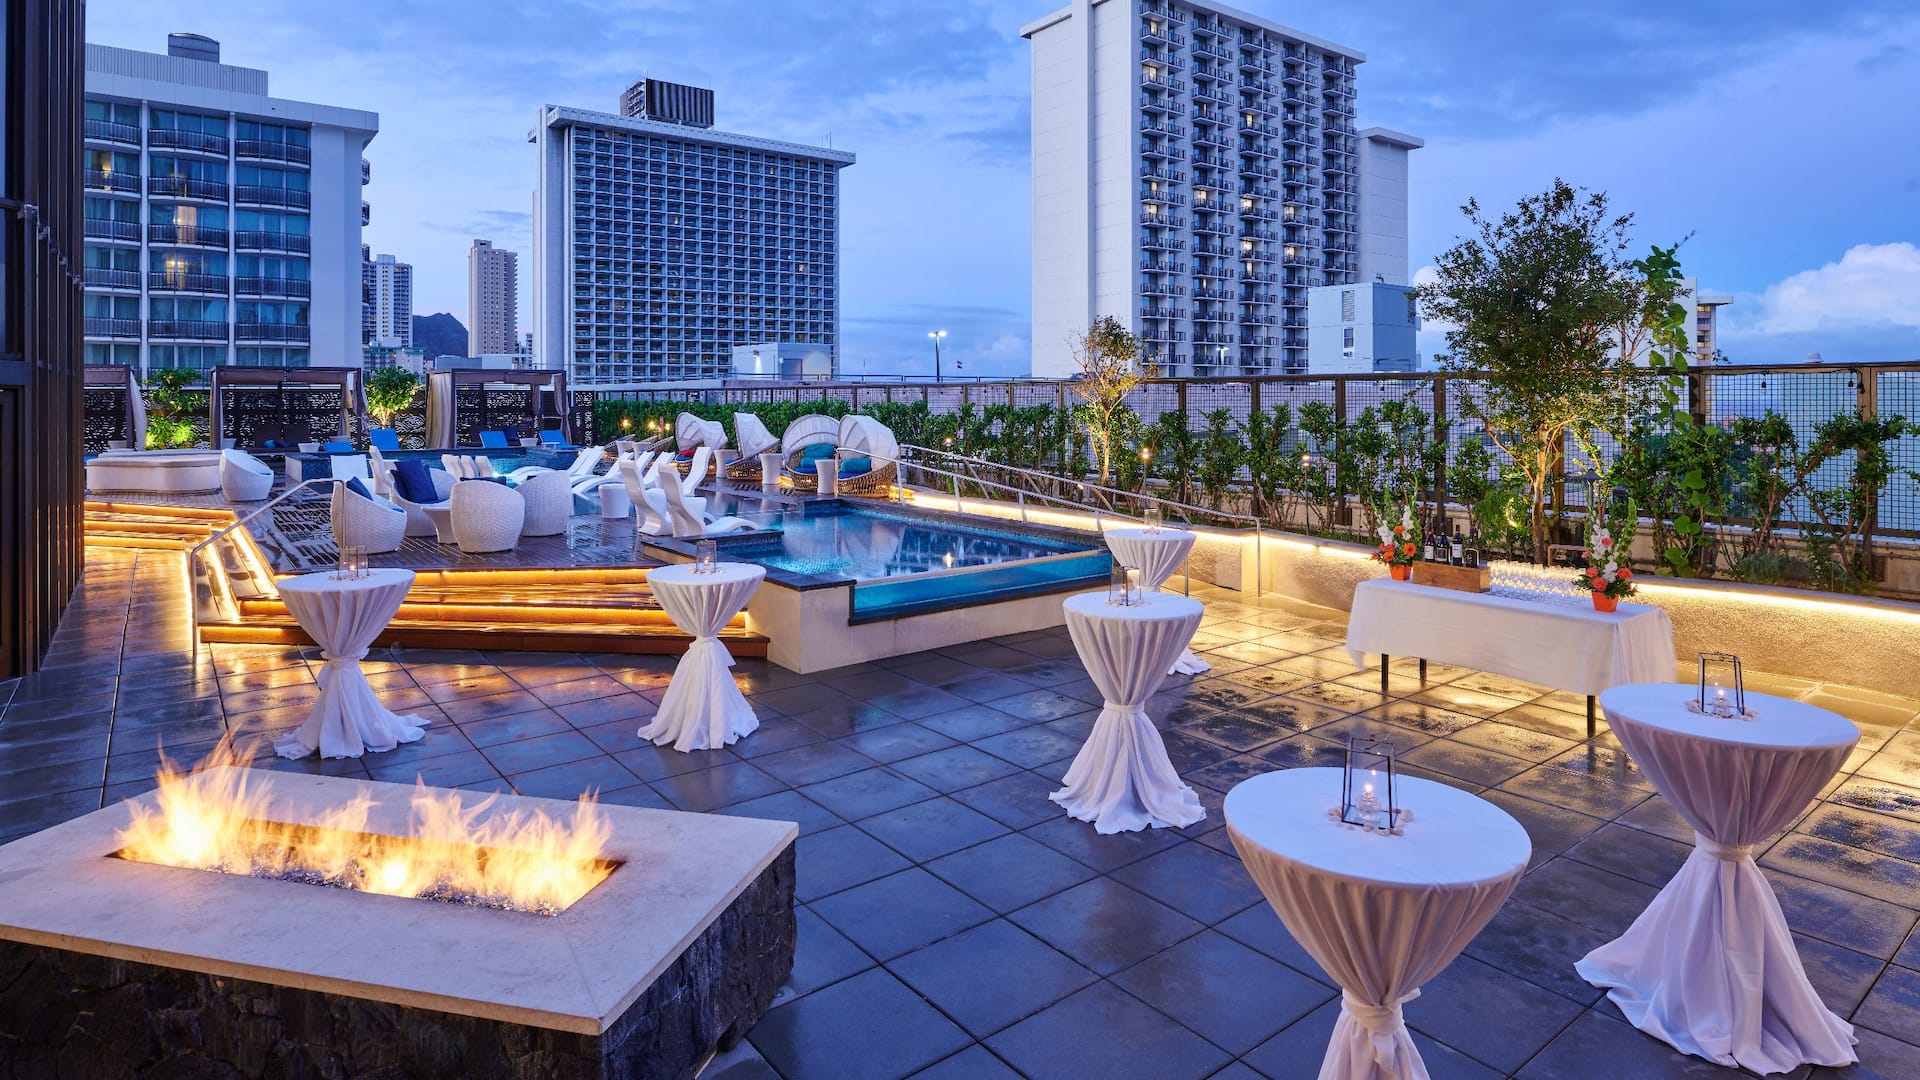 Outdoor party and lounge area at a seaside Waikiki hotel